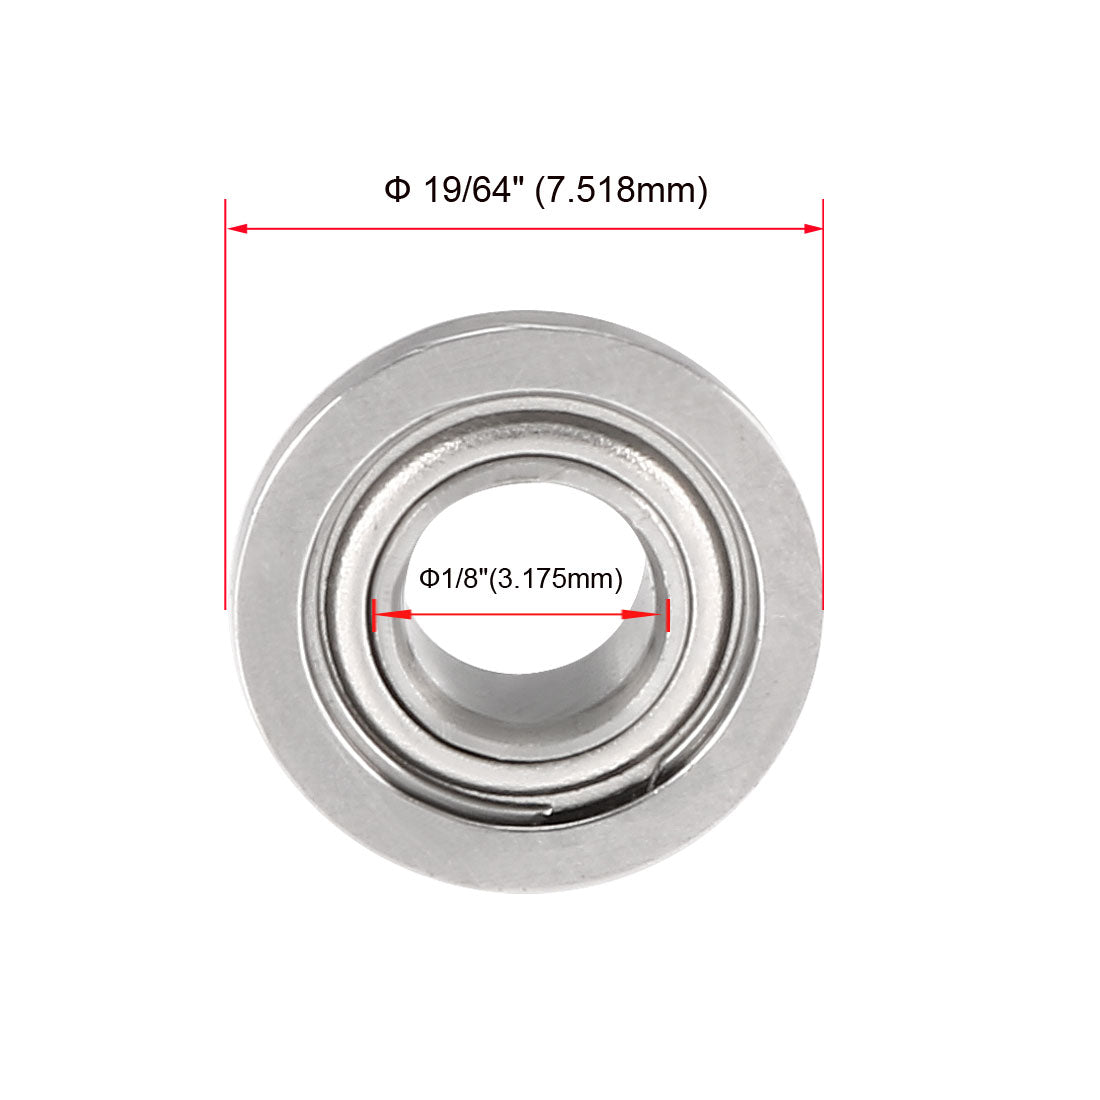 uxcell Uxcell FR144ZZ Flange Ball 1/8" x 1/4" x 7/64" Double Metal Shielded (GCr15) Chrome Steel Bearings 5pcs